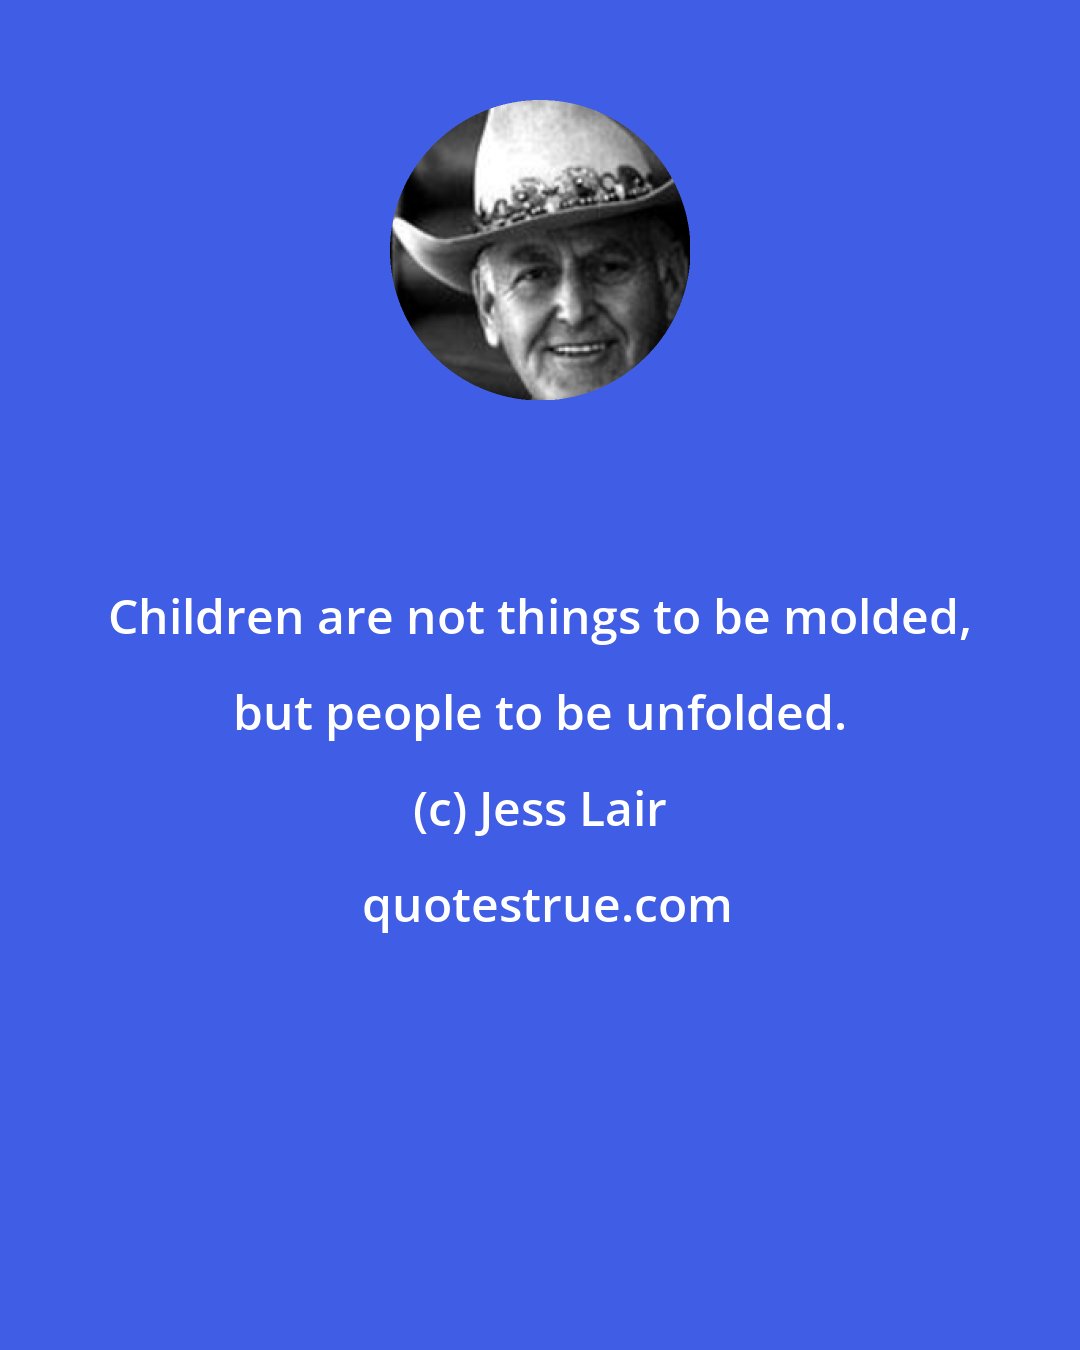 Jess Lair: Children are not things to be molded, but people to be unfolded.